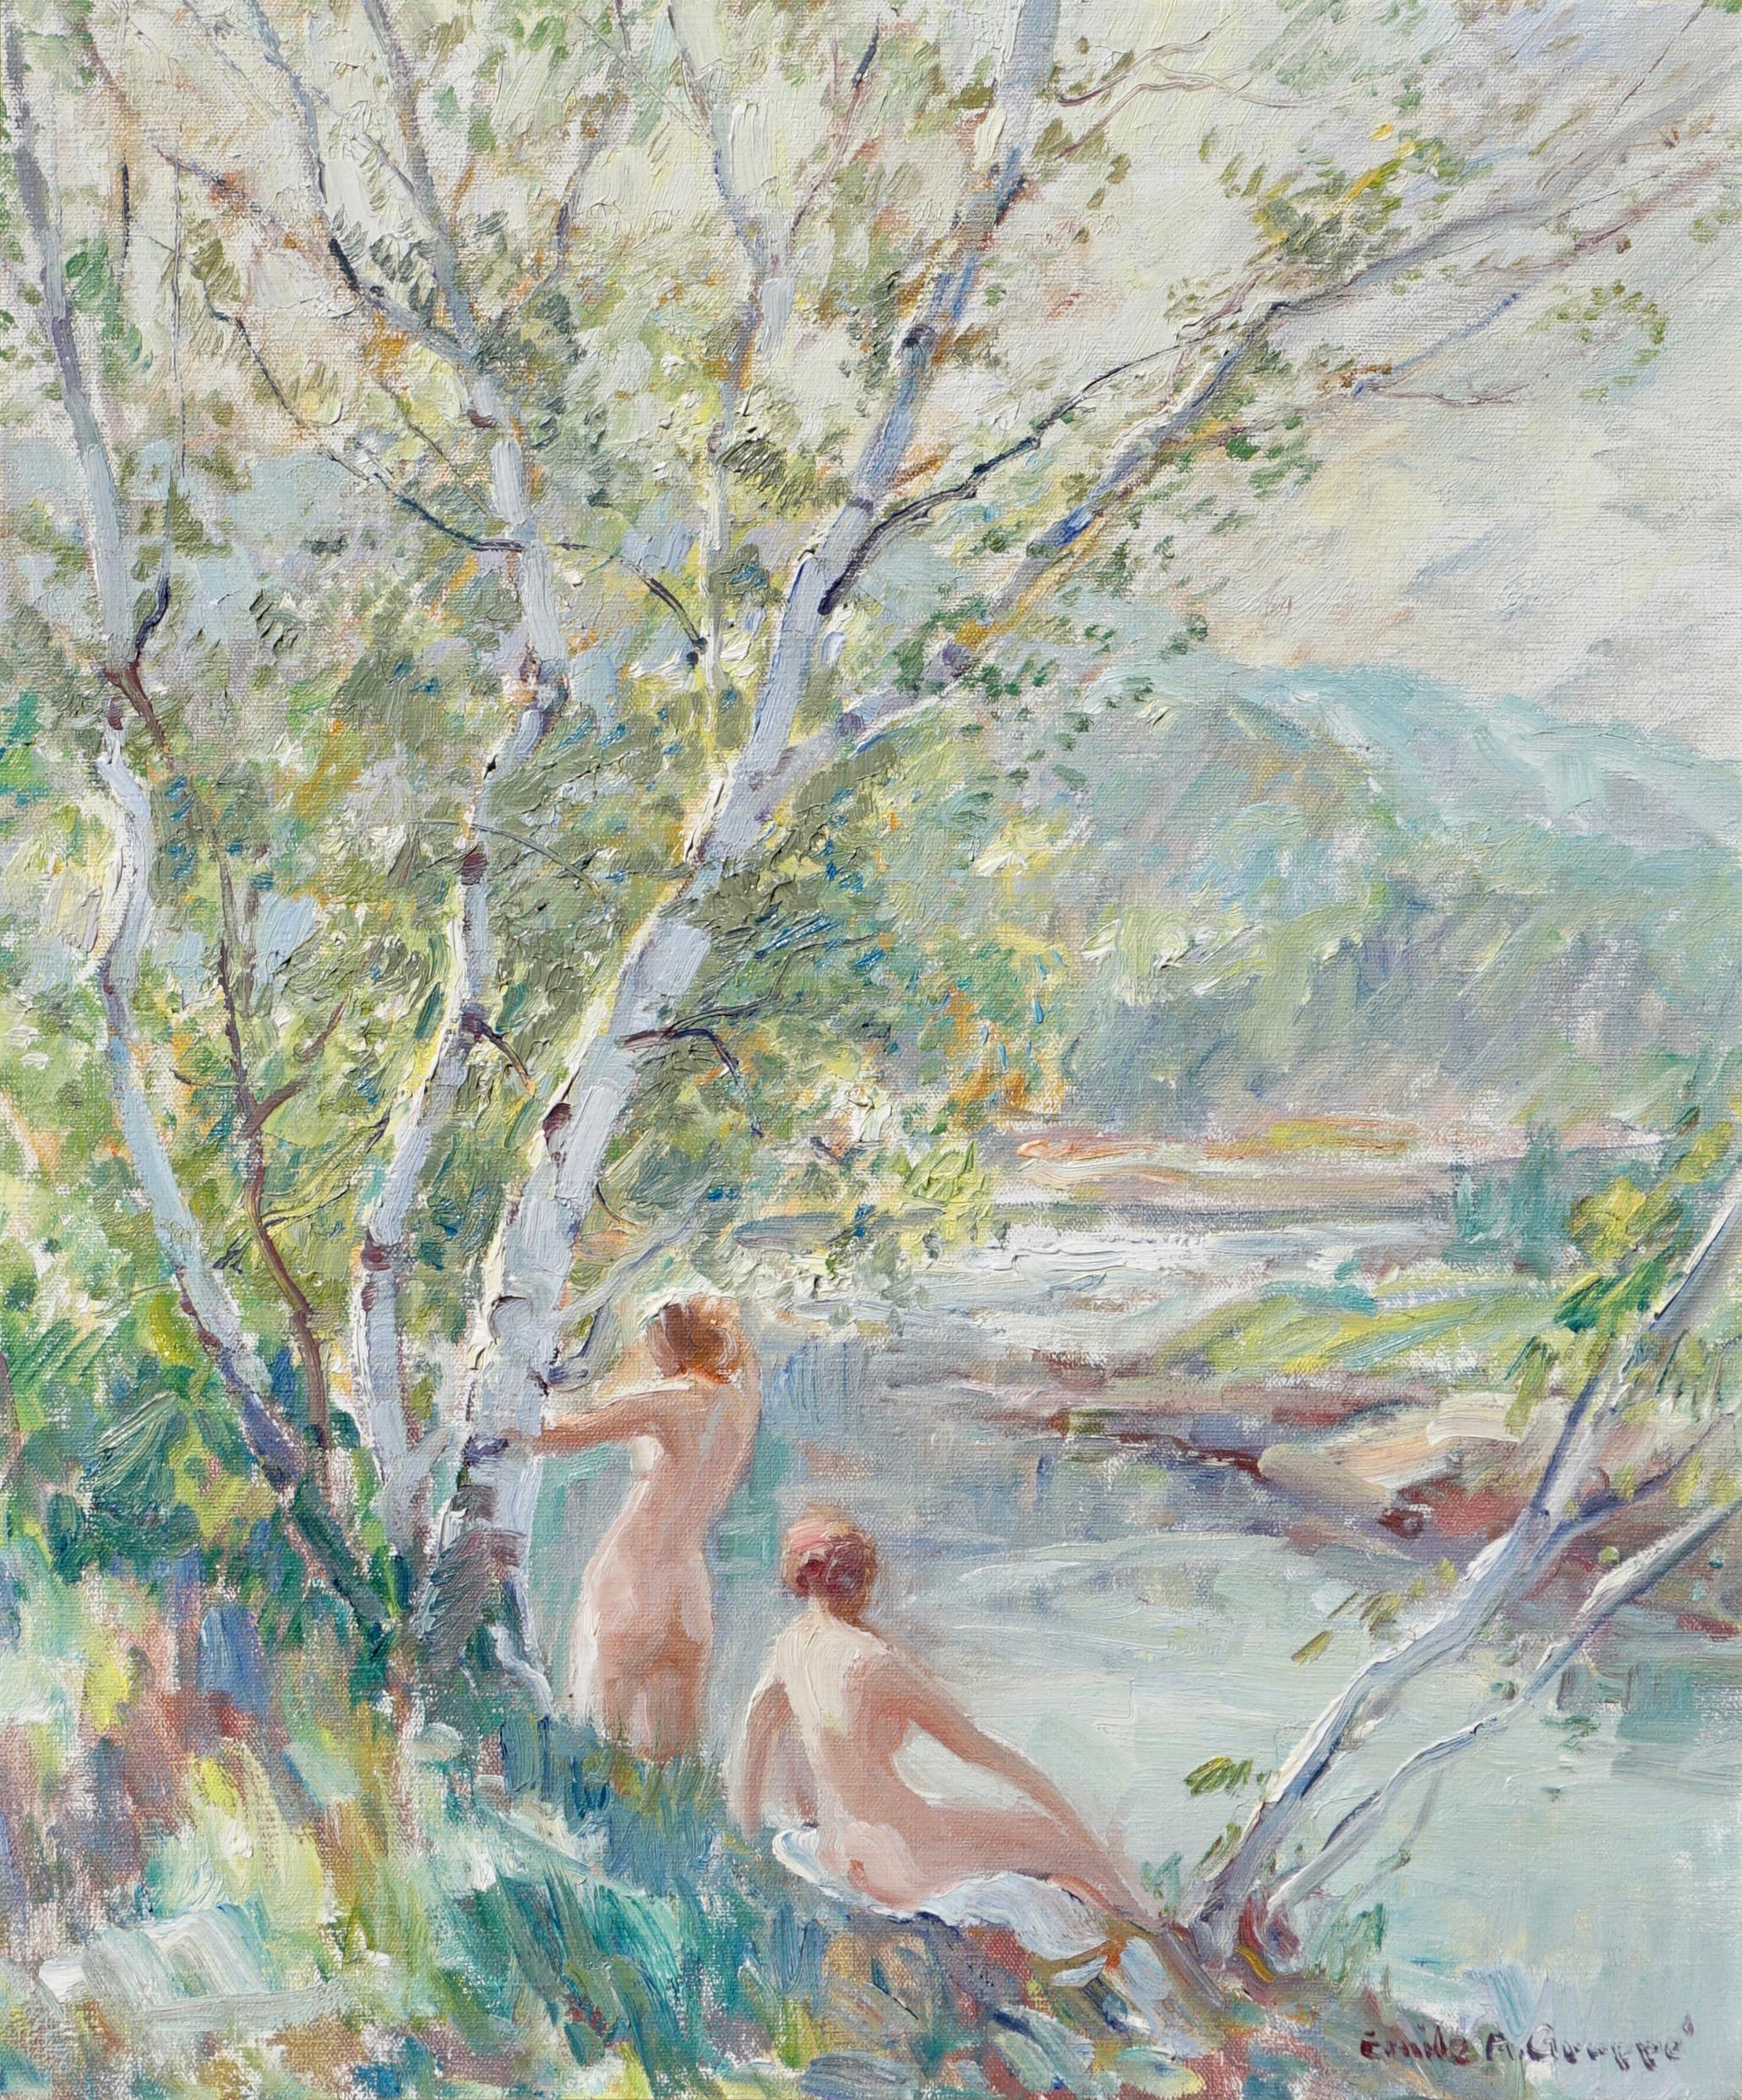 Emile Albert Gruppe “Nymphs” Oil Painting Nudes by a River For Sale 1